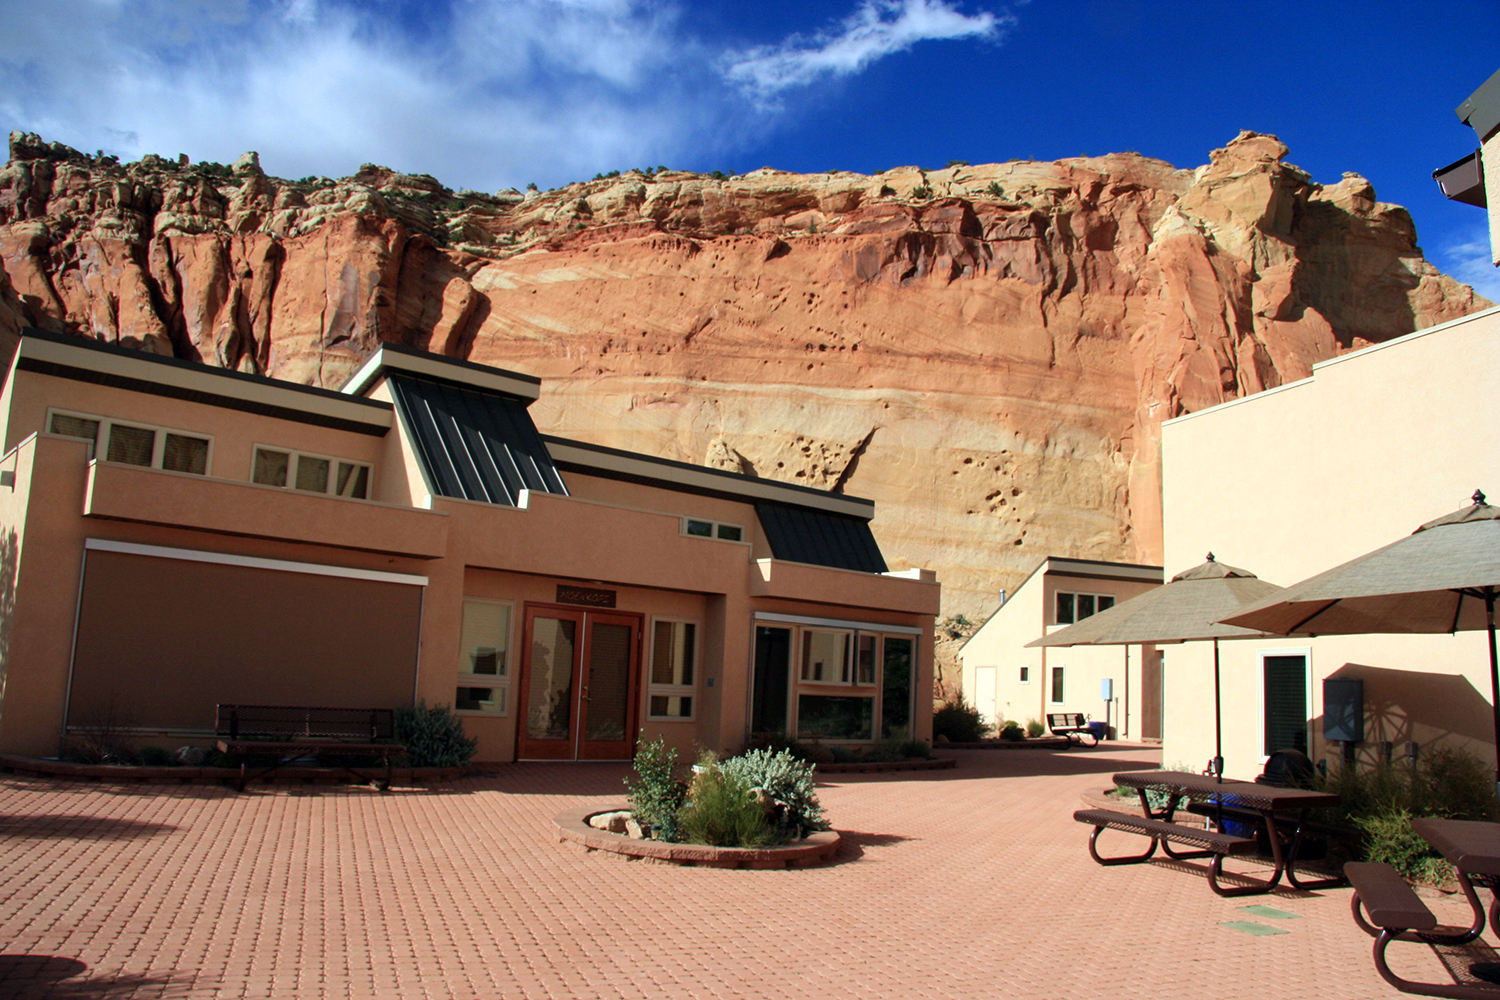 Location: Capitol Reef Field Station